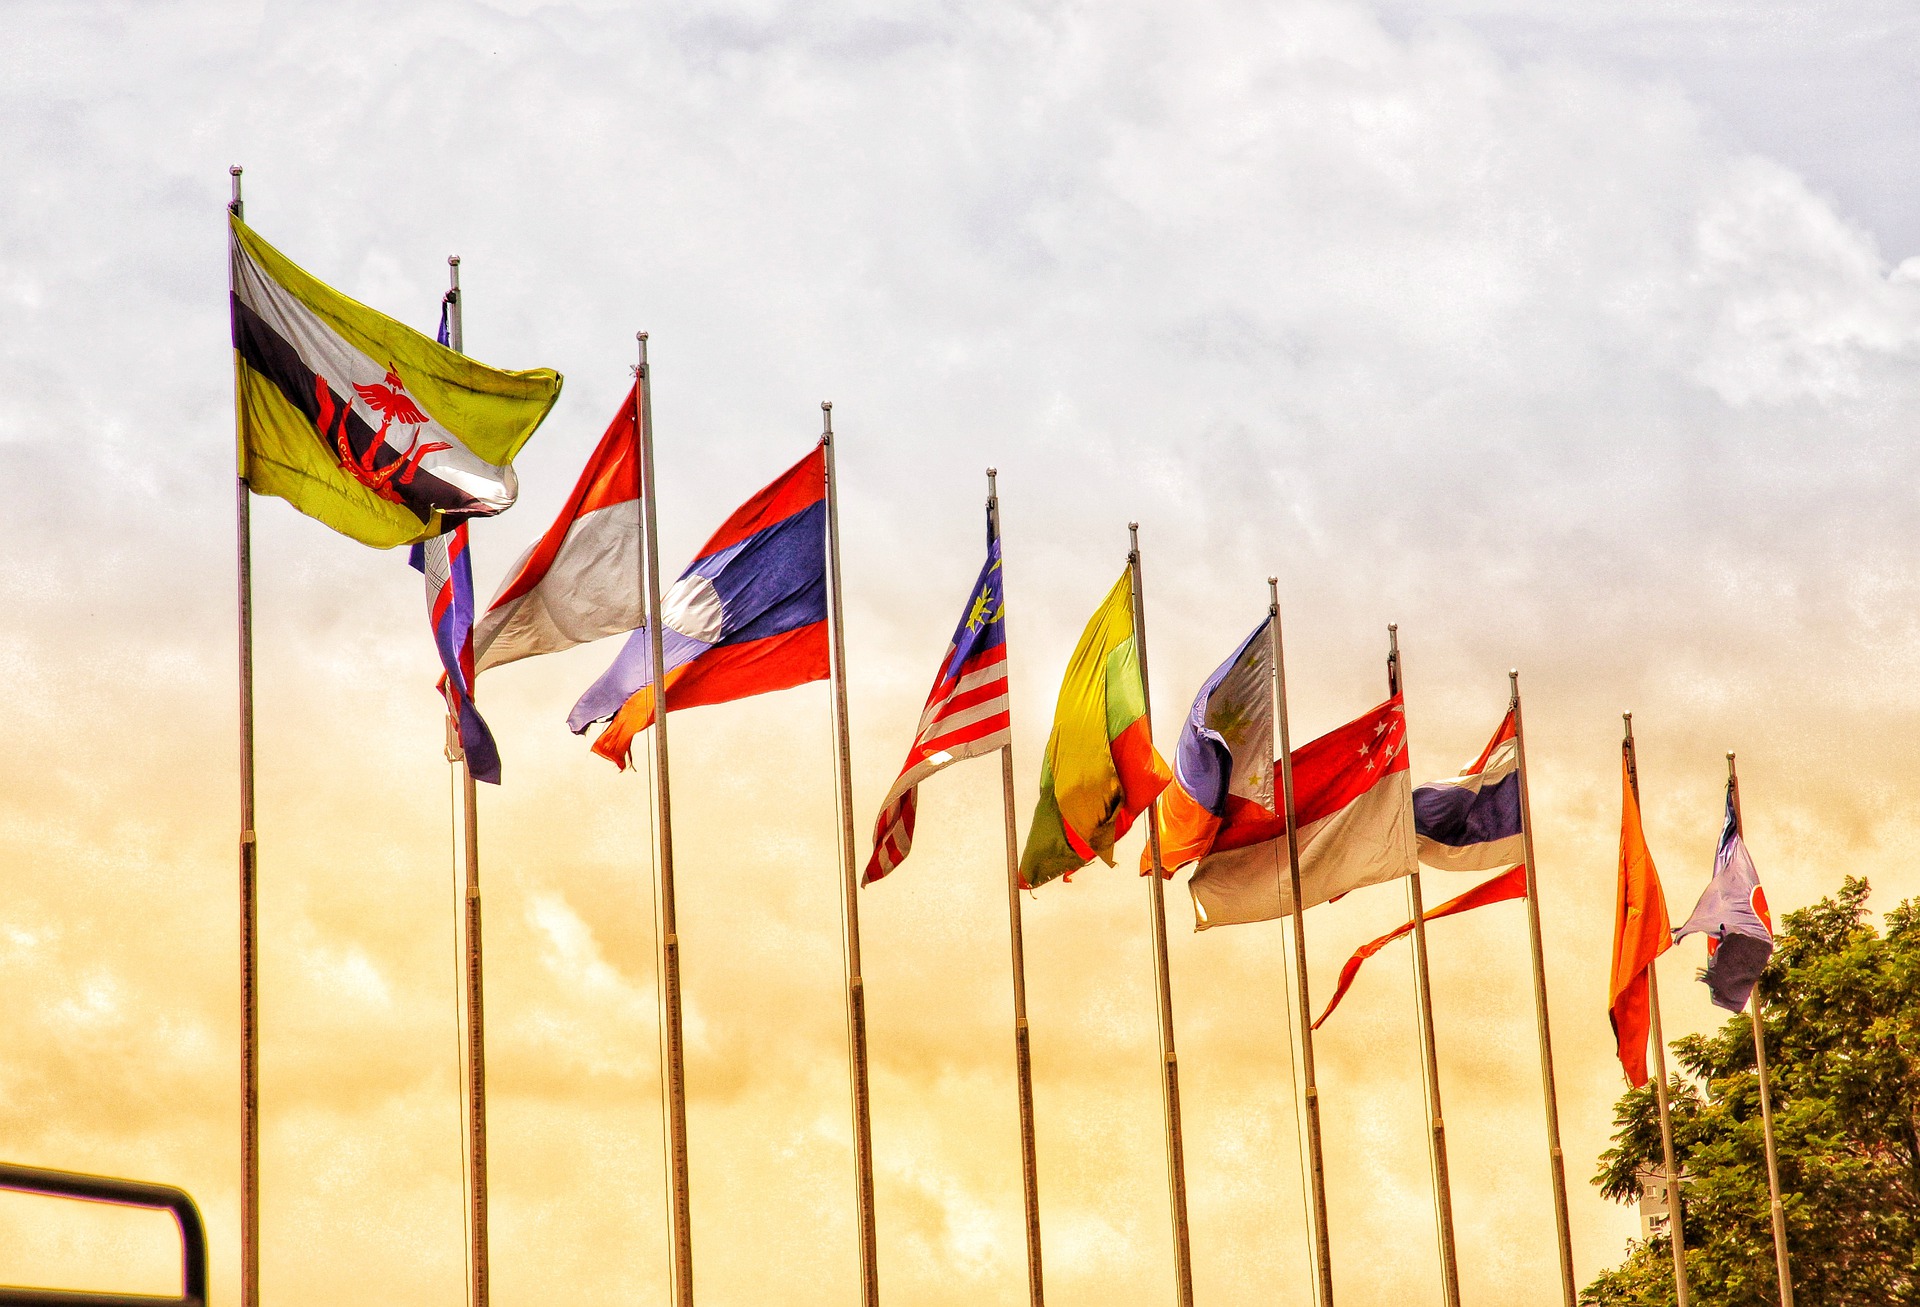 Flags of the ASEAN members, plus the collective flag